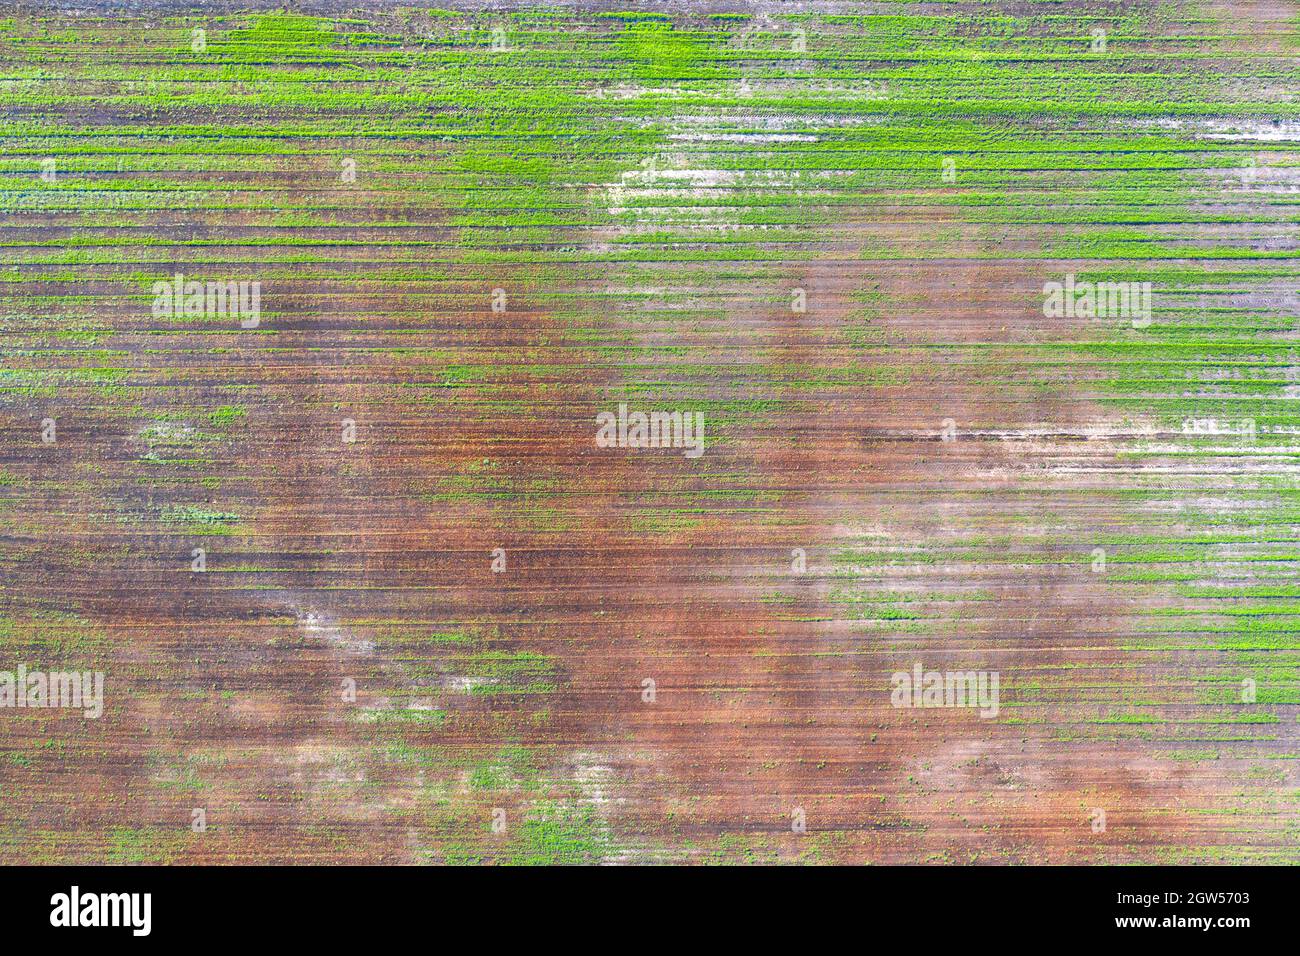 Damaged crops in the field. due to poor breed conditions, or poor soil or disease. Sick agricultural crops. Stock Photo